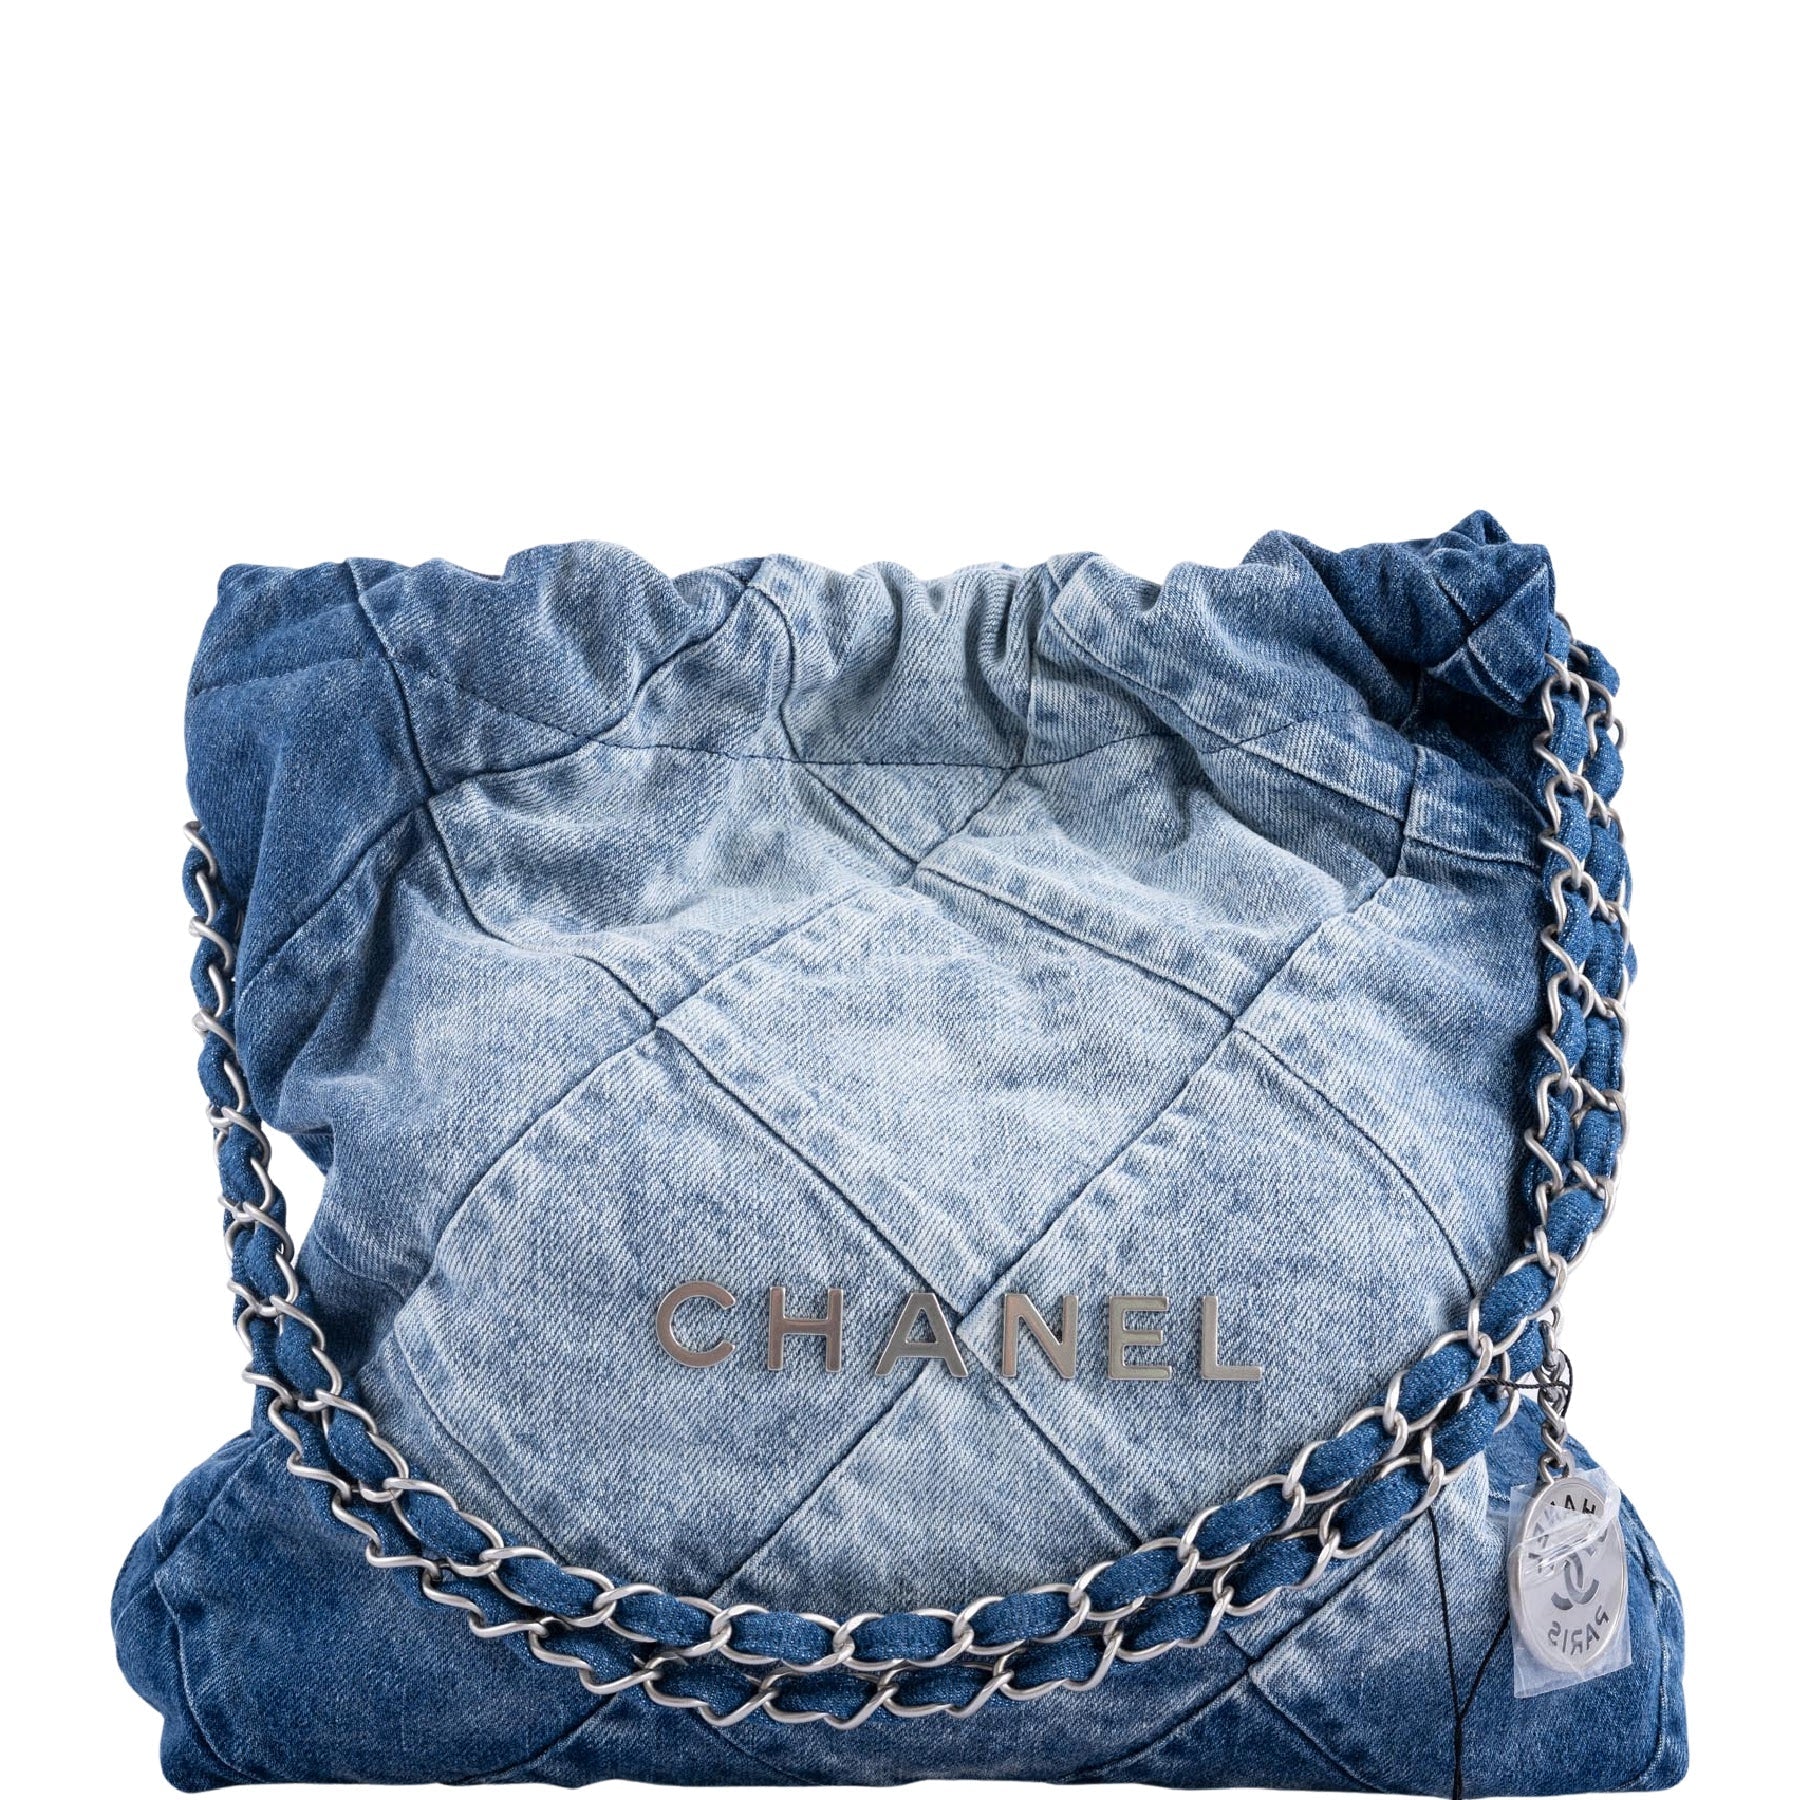 CHANEL 22S - All CHANEL 22 BAG Details and Sizes Reviewed - All